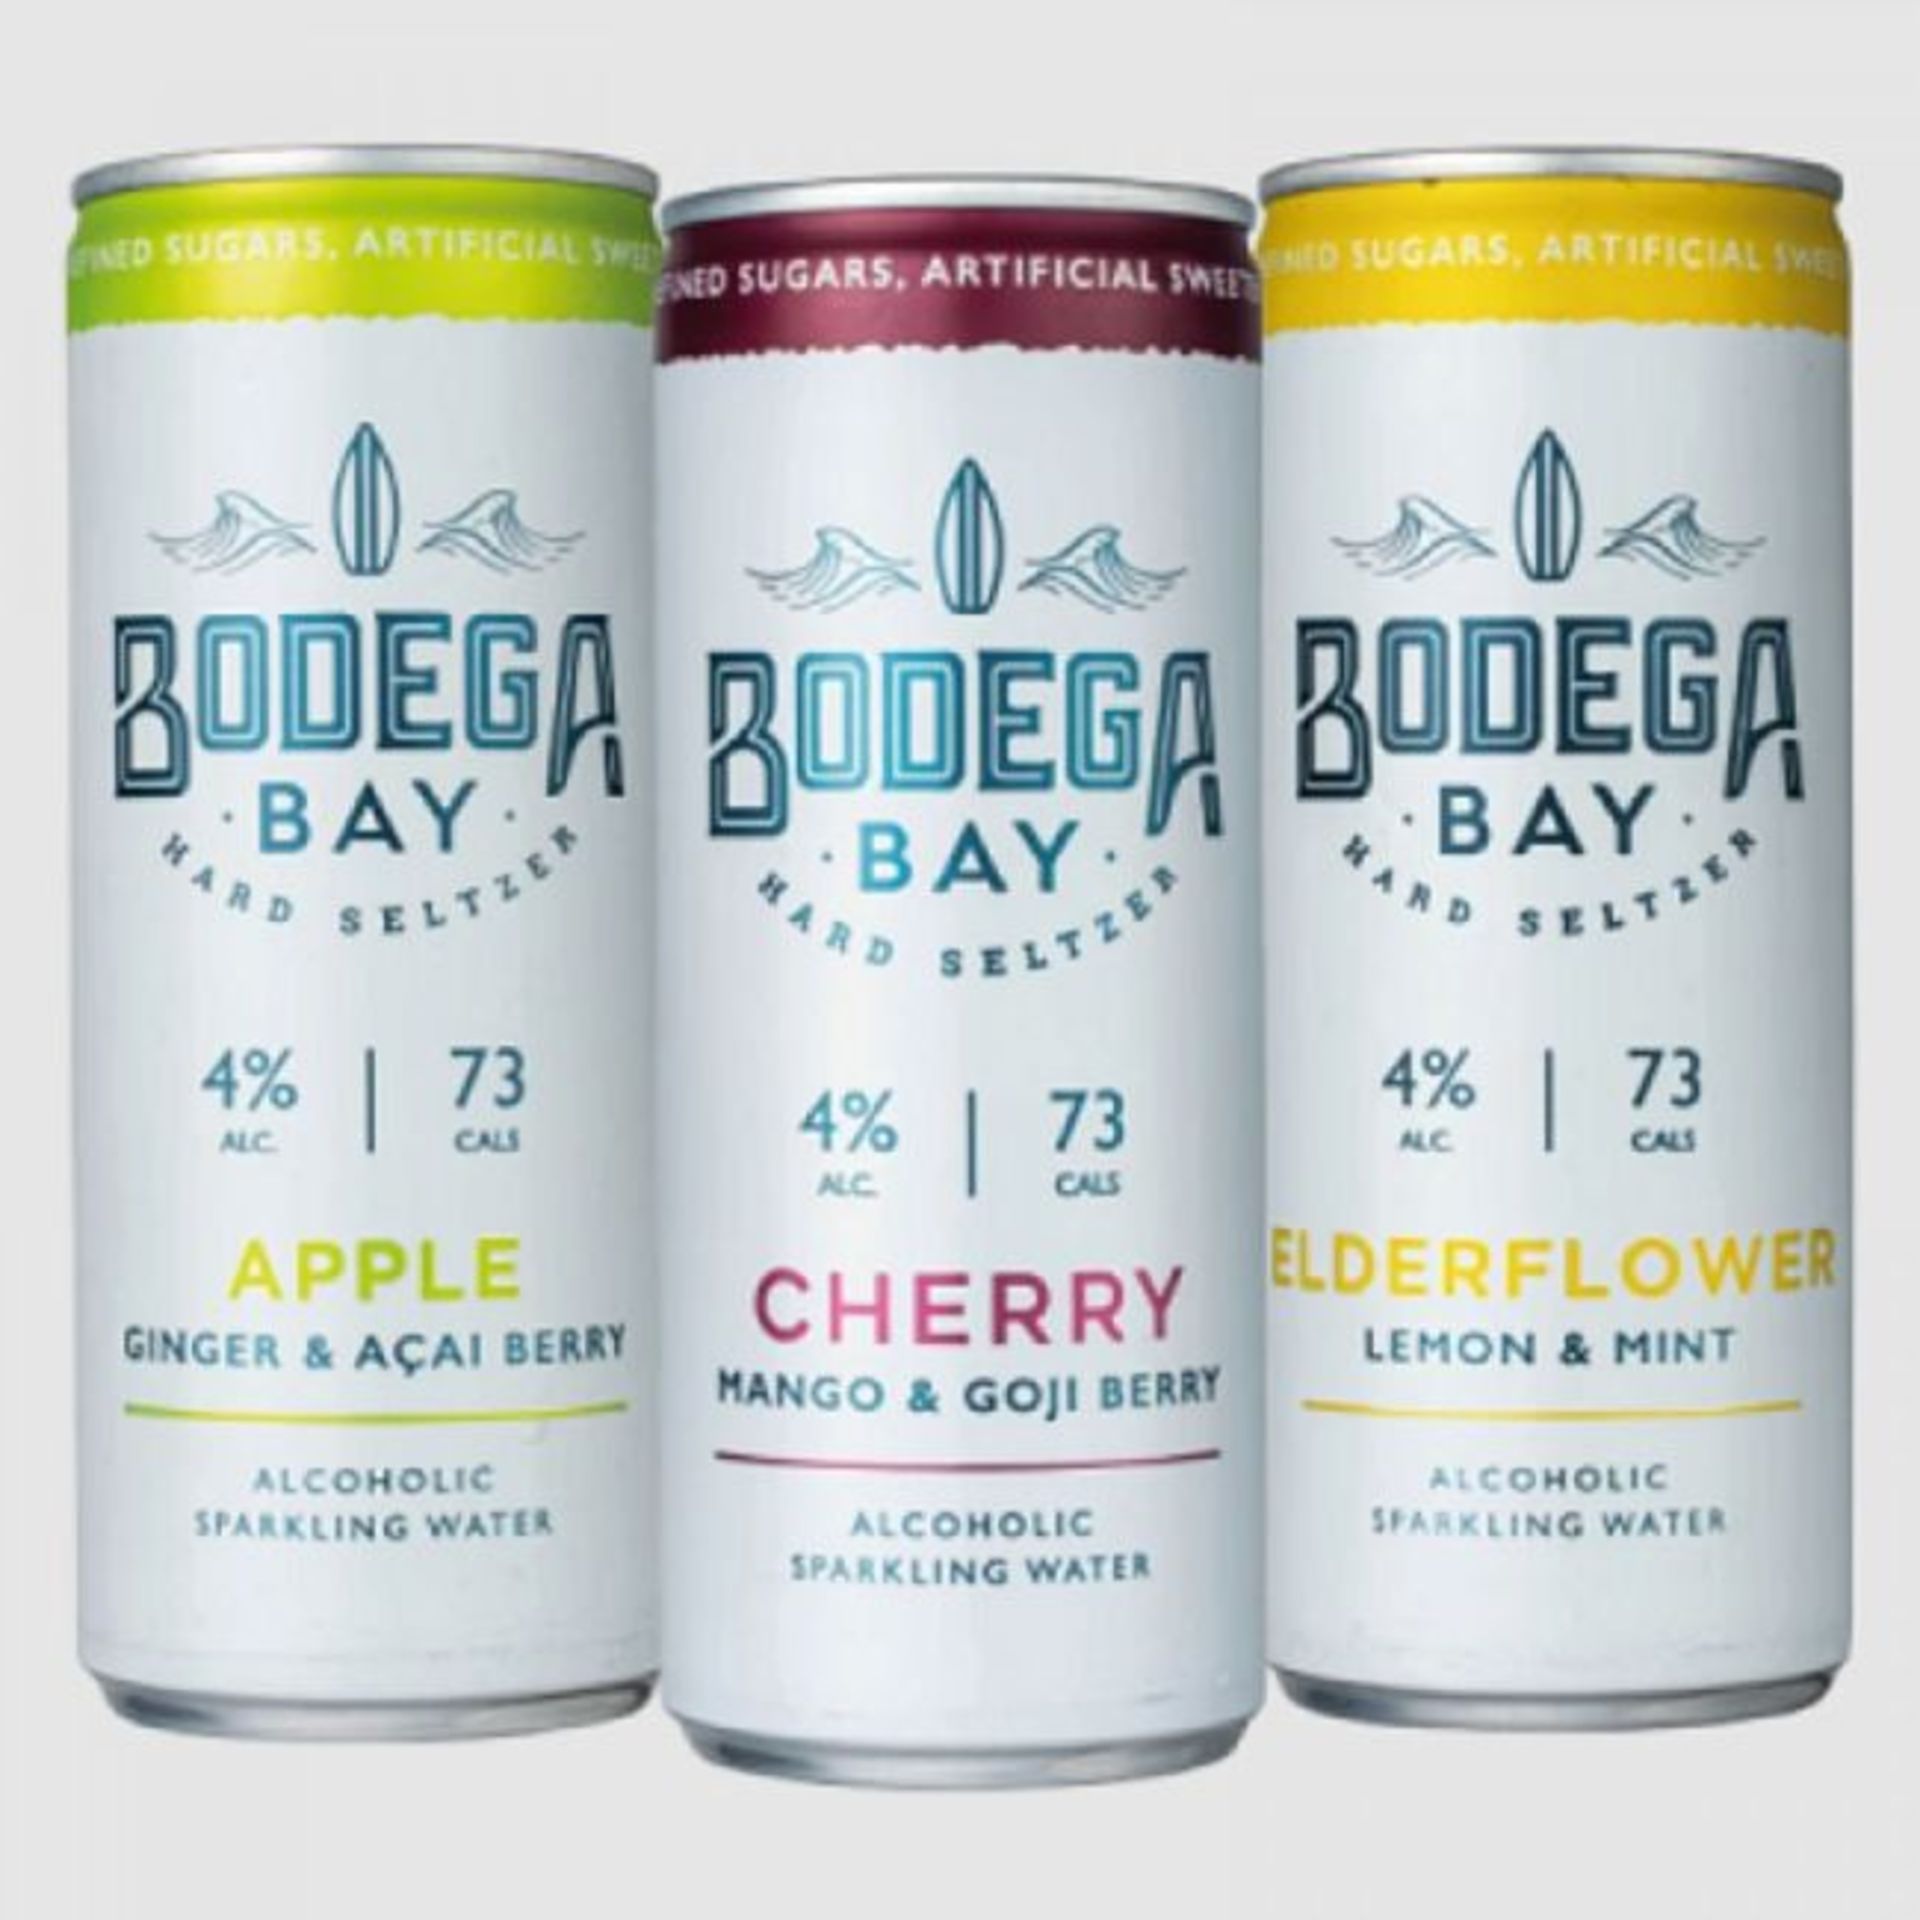 1,080 x Cans of Bodega Bay Hard Seltzer 250ml Alcoholic Sparkling Water Drinks - RESALE JOB LOT - - Image 11 of 21